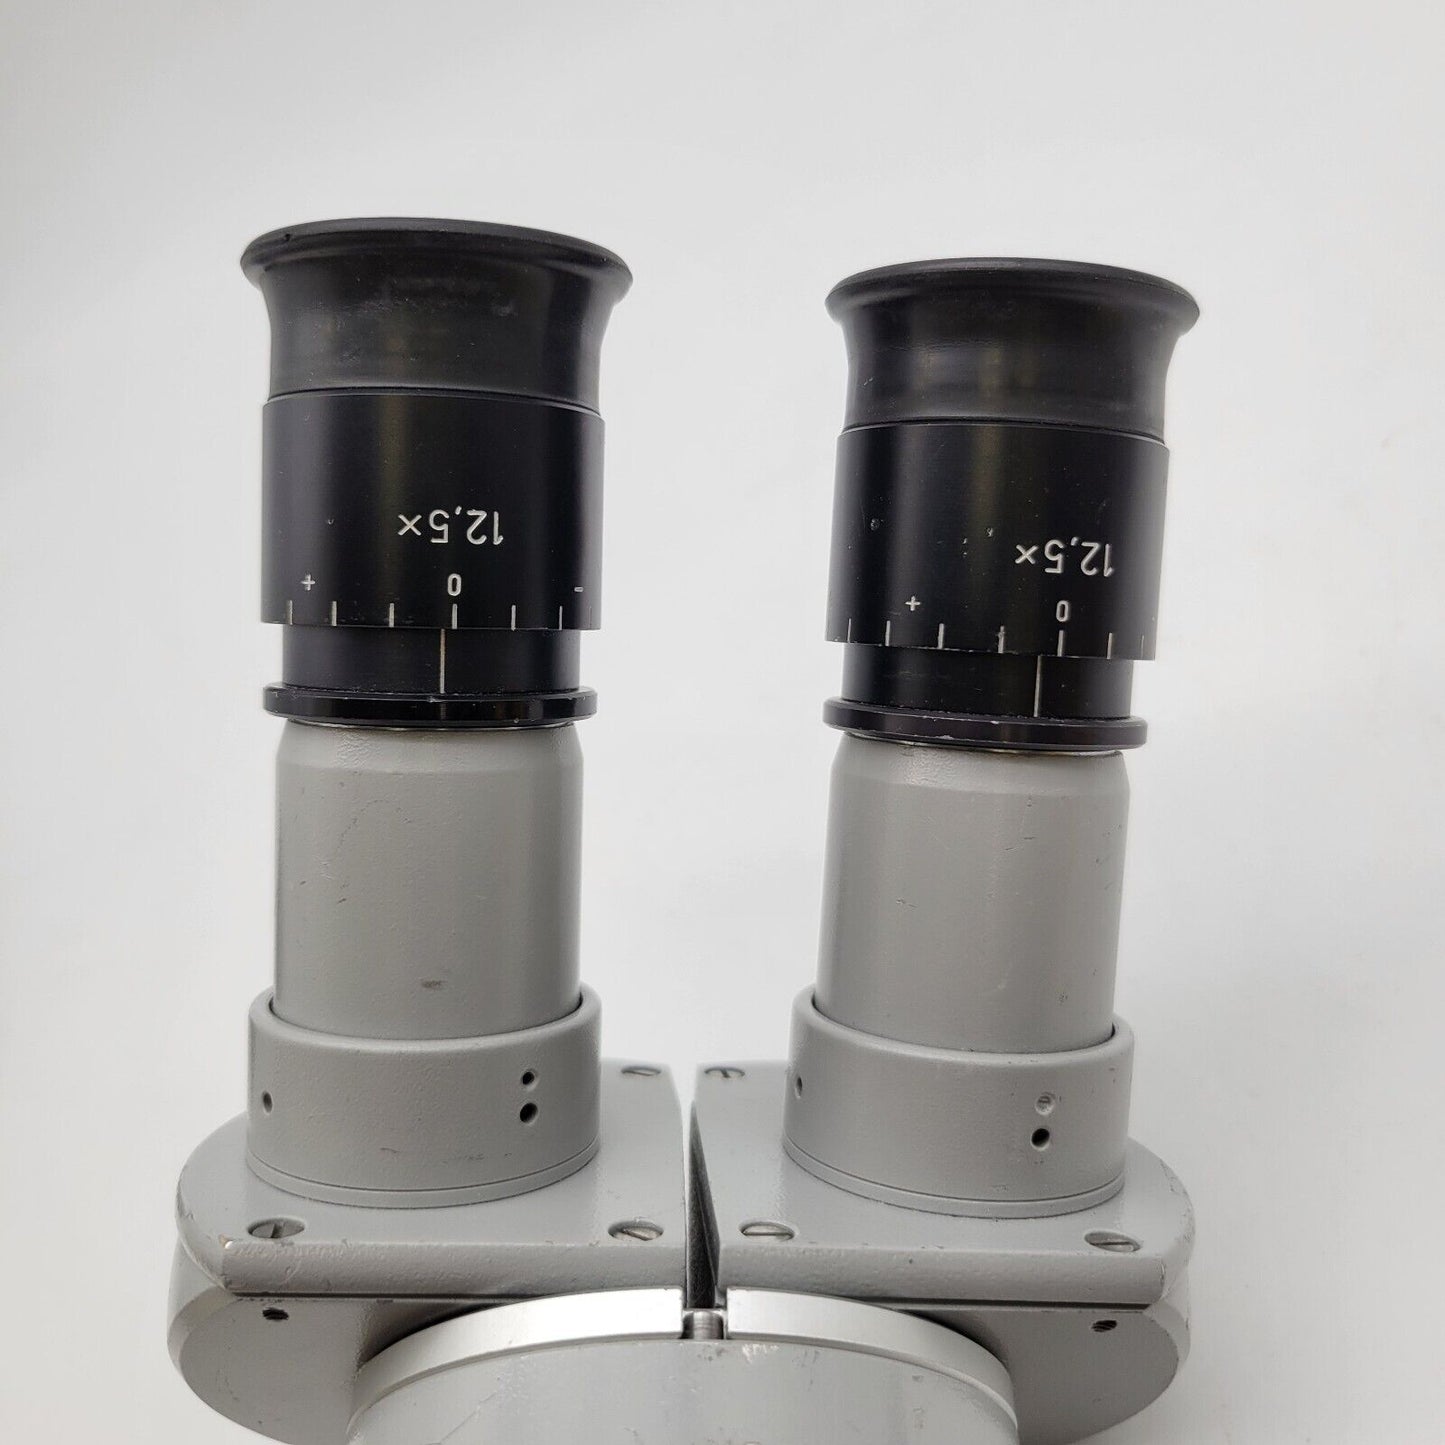 Zeiss Microscope OPMI Co Observation Tube with Binocular Head & 12.5x Eyepieces - microscopemarketplace